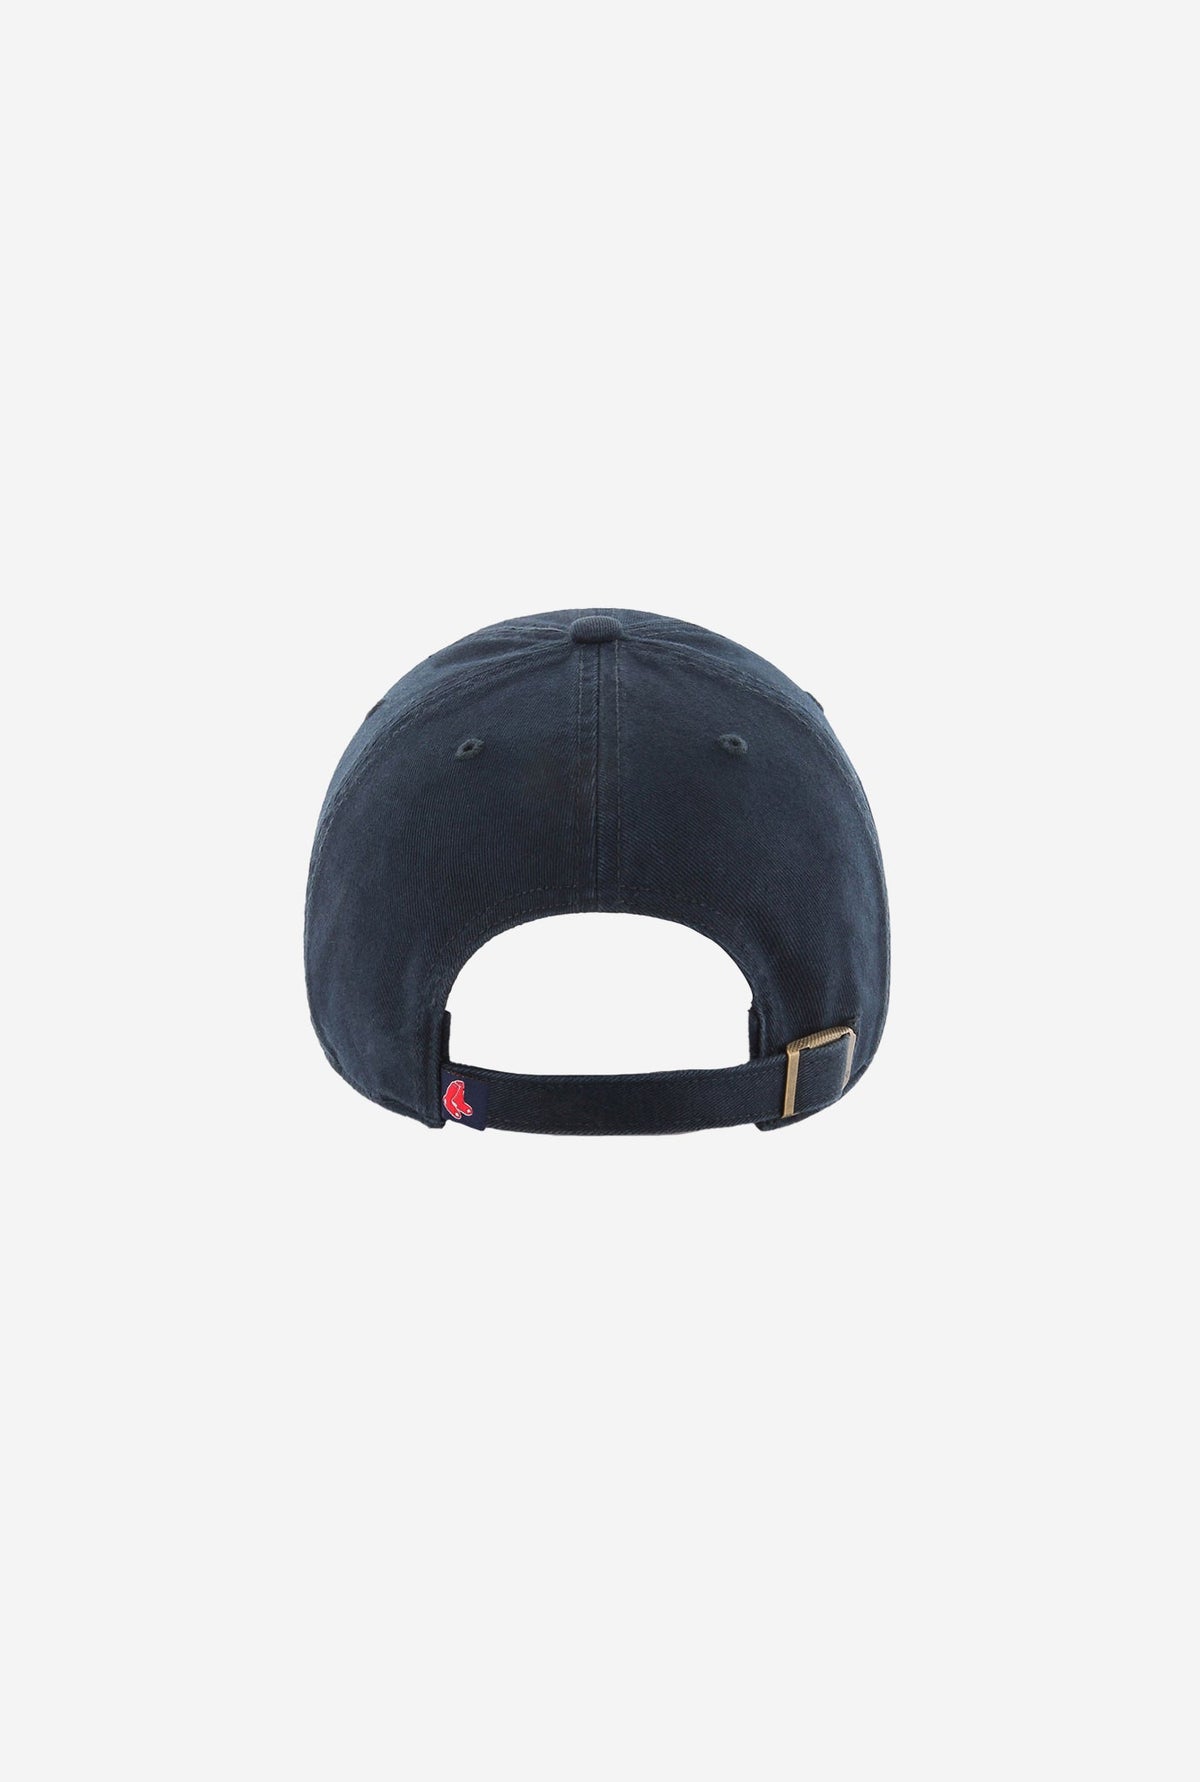 Boston Red Sox Clean Up Cap - Navy